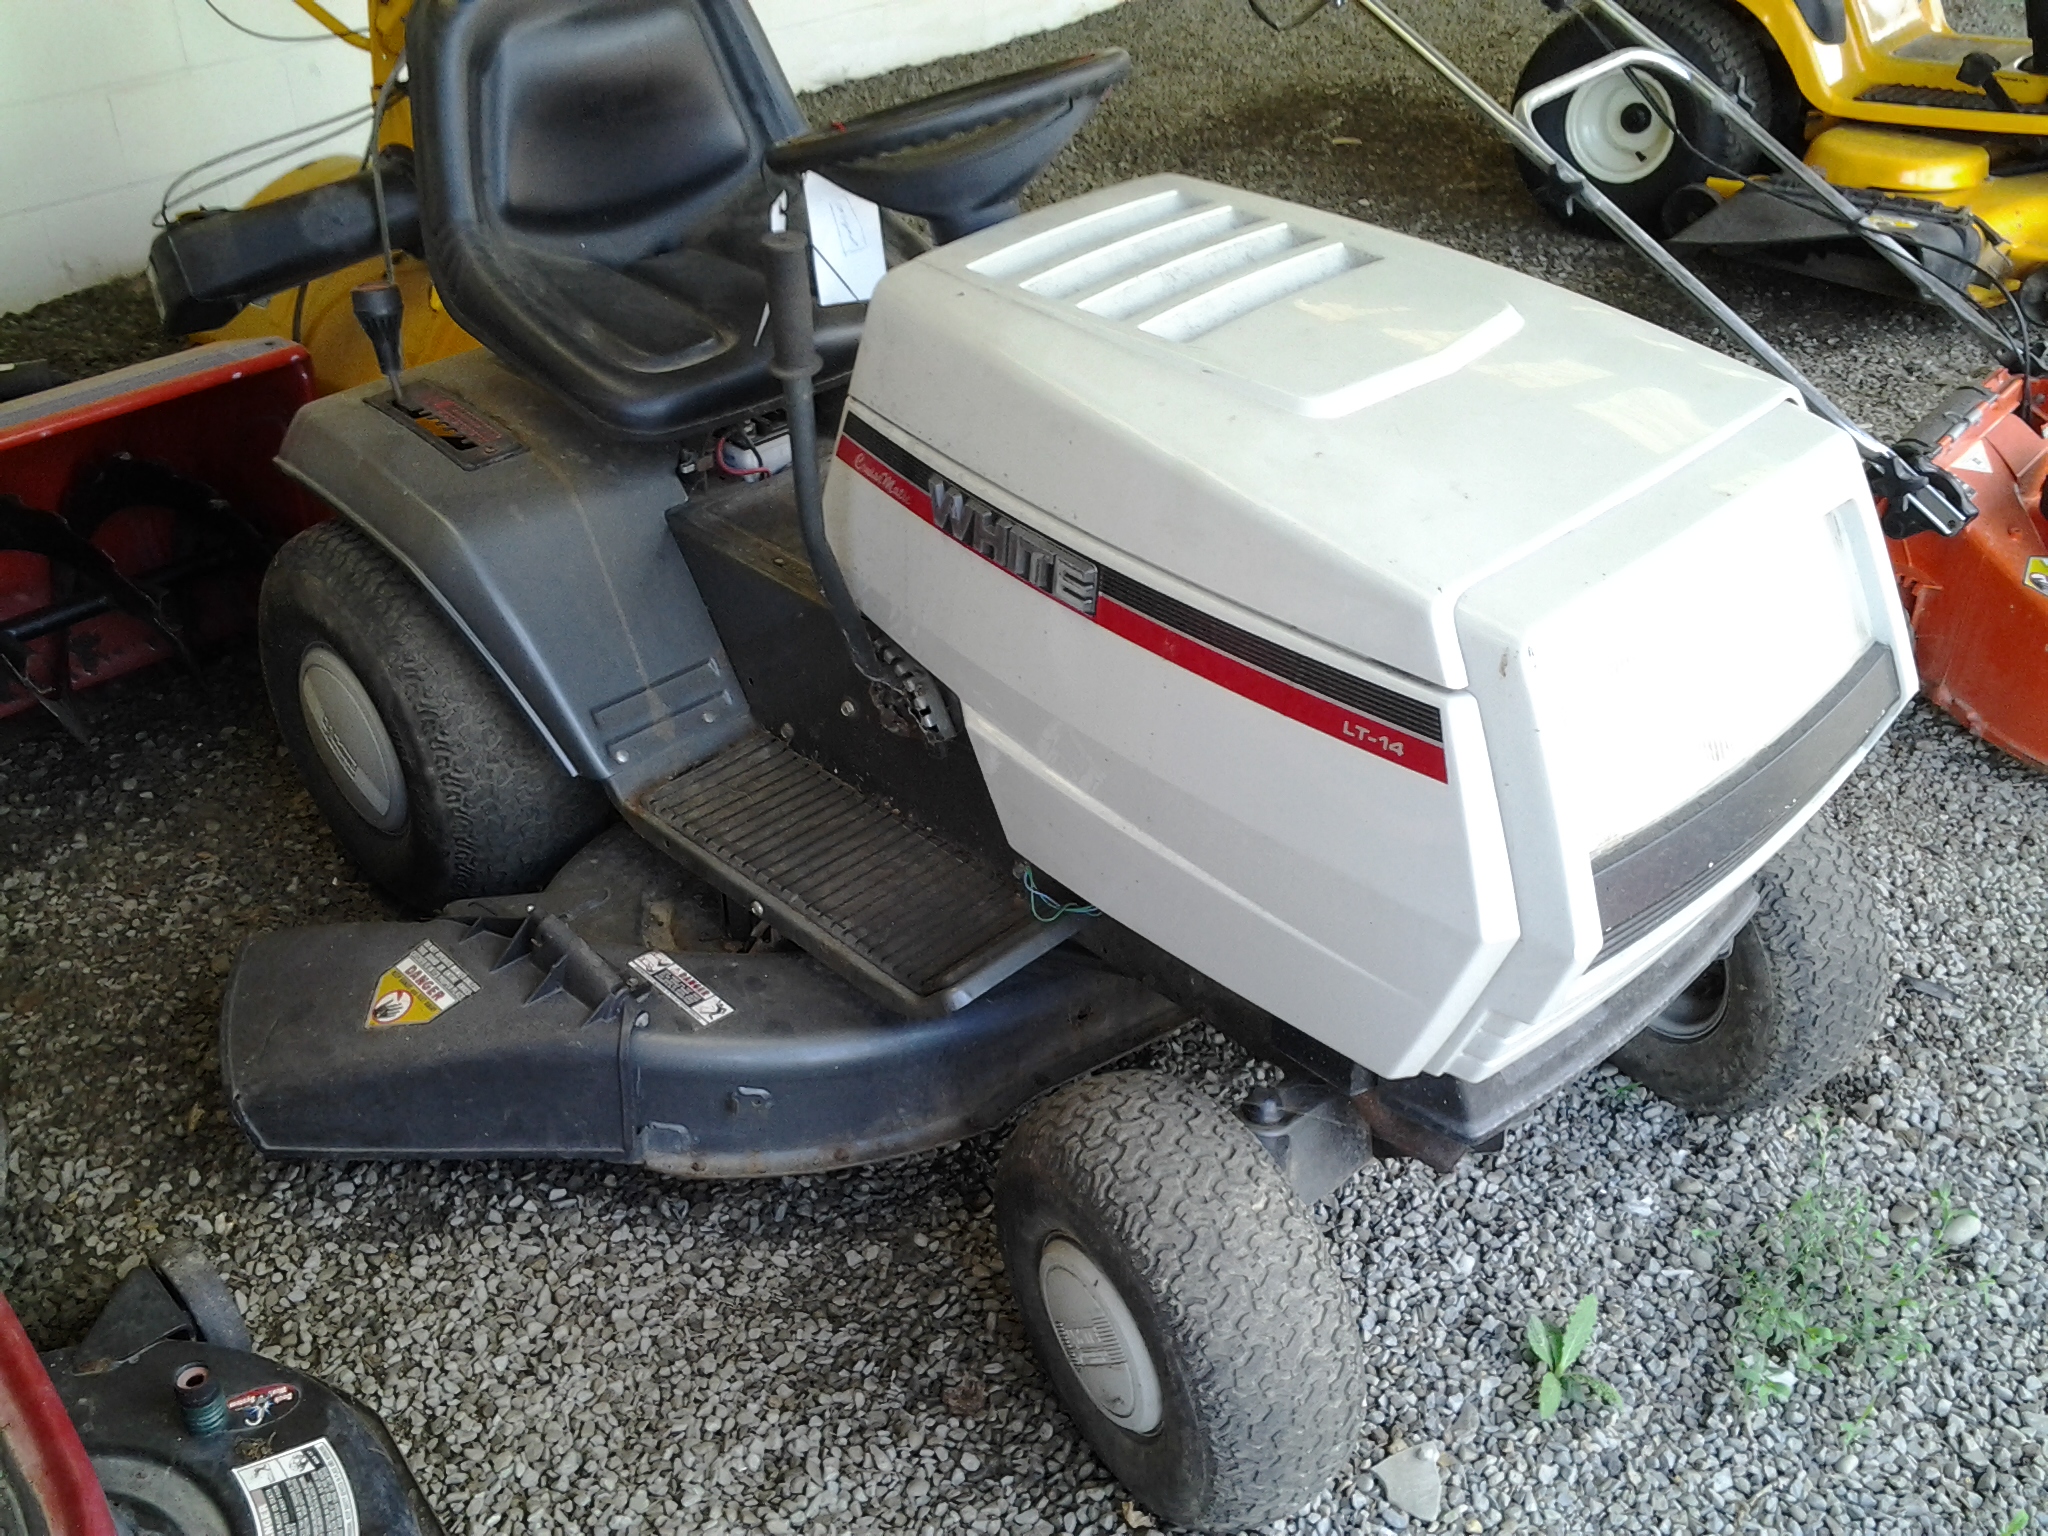 Home / Shop / Used Products / White LT-14 Lawn Tractor Return to ...